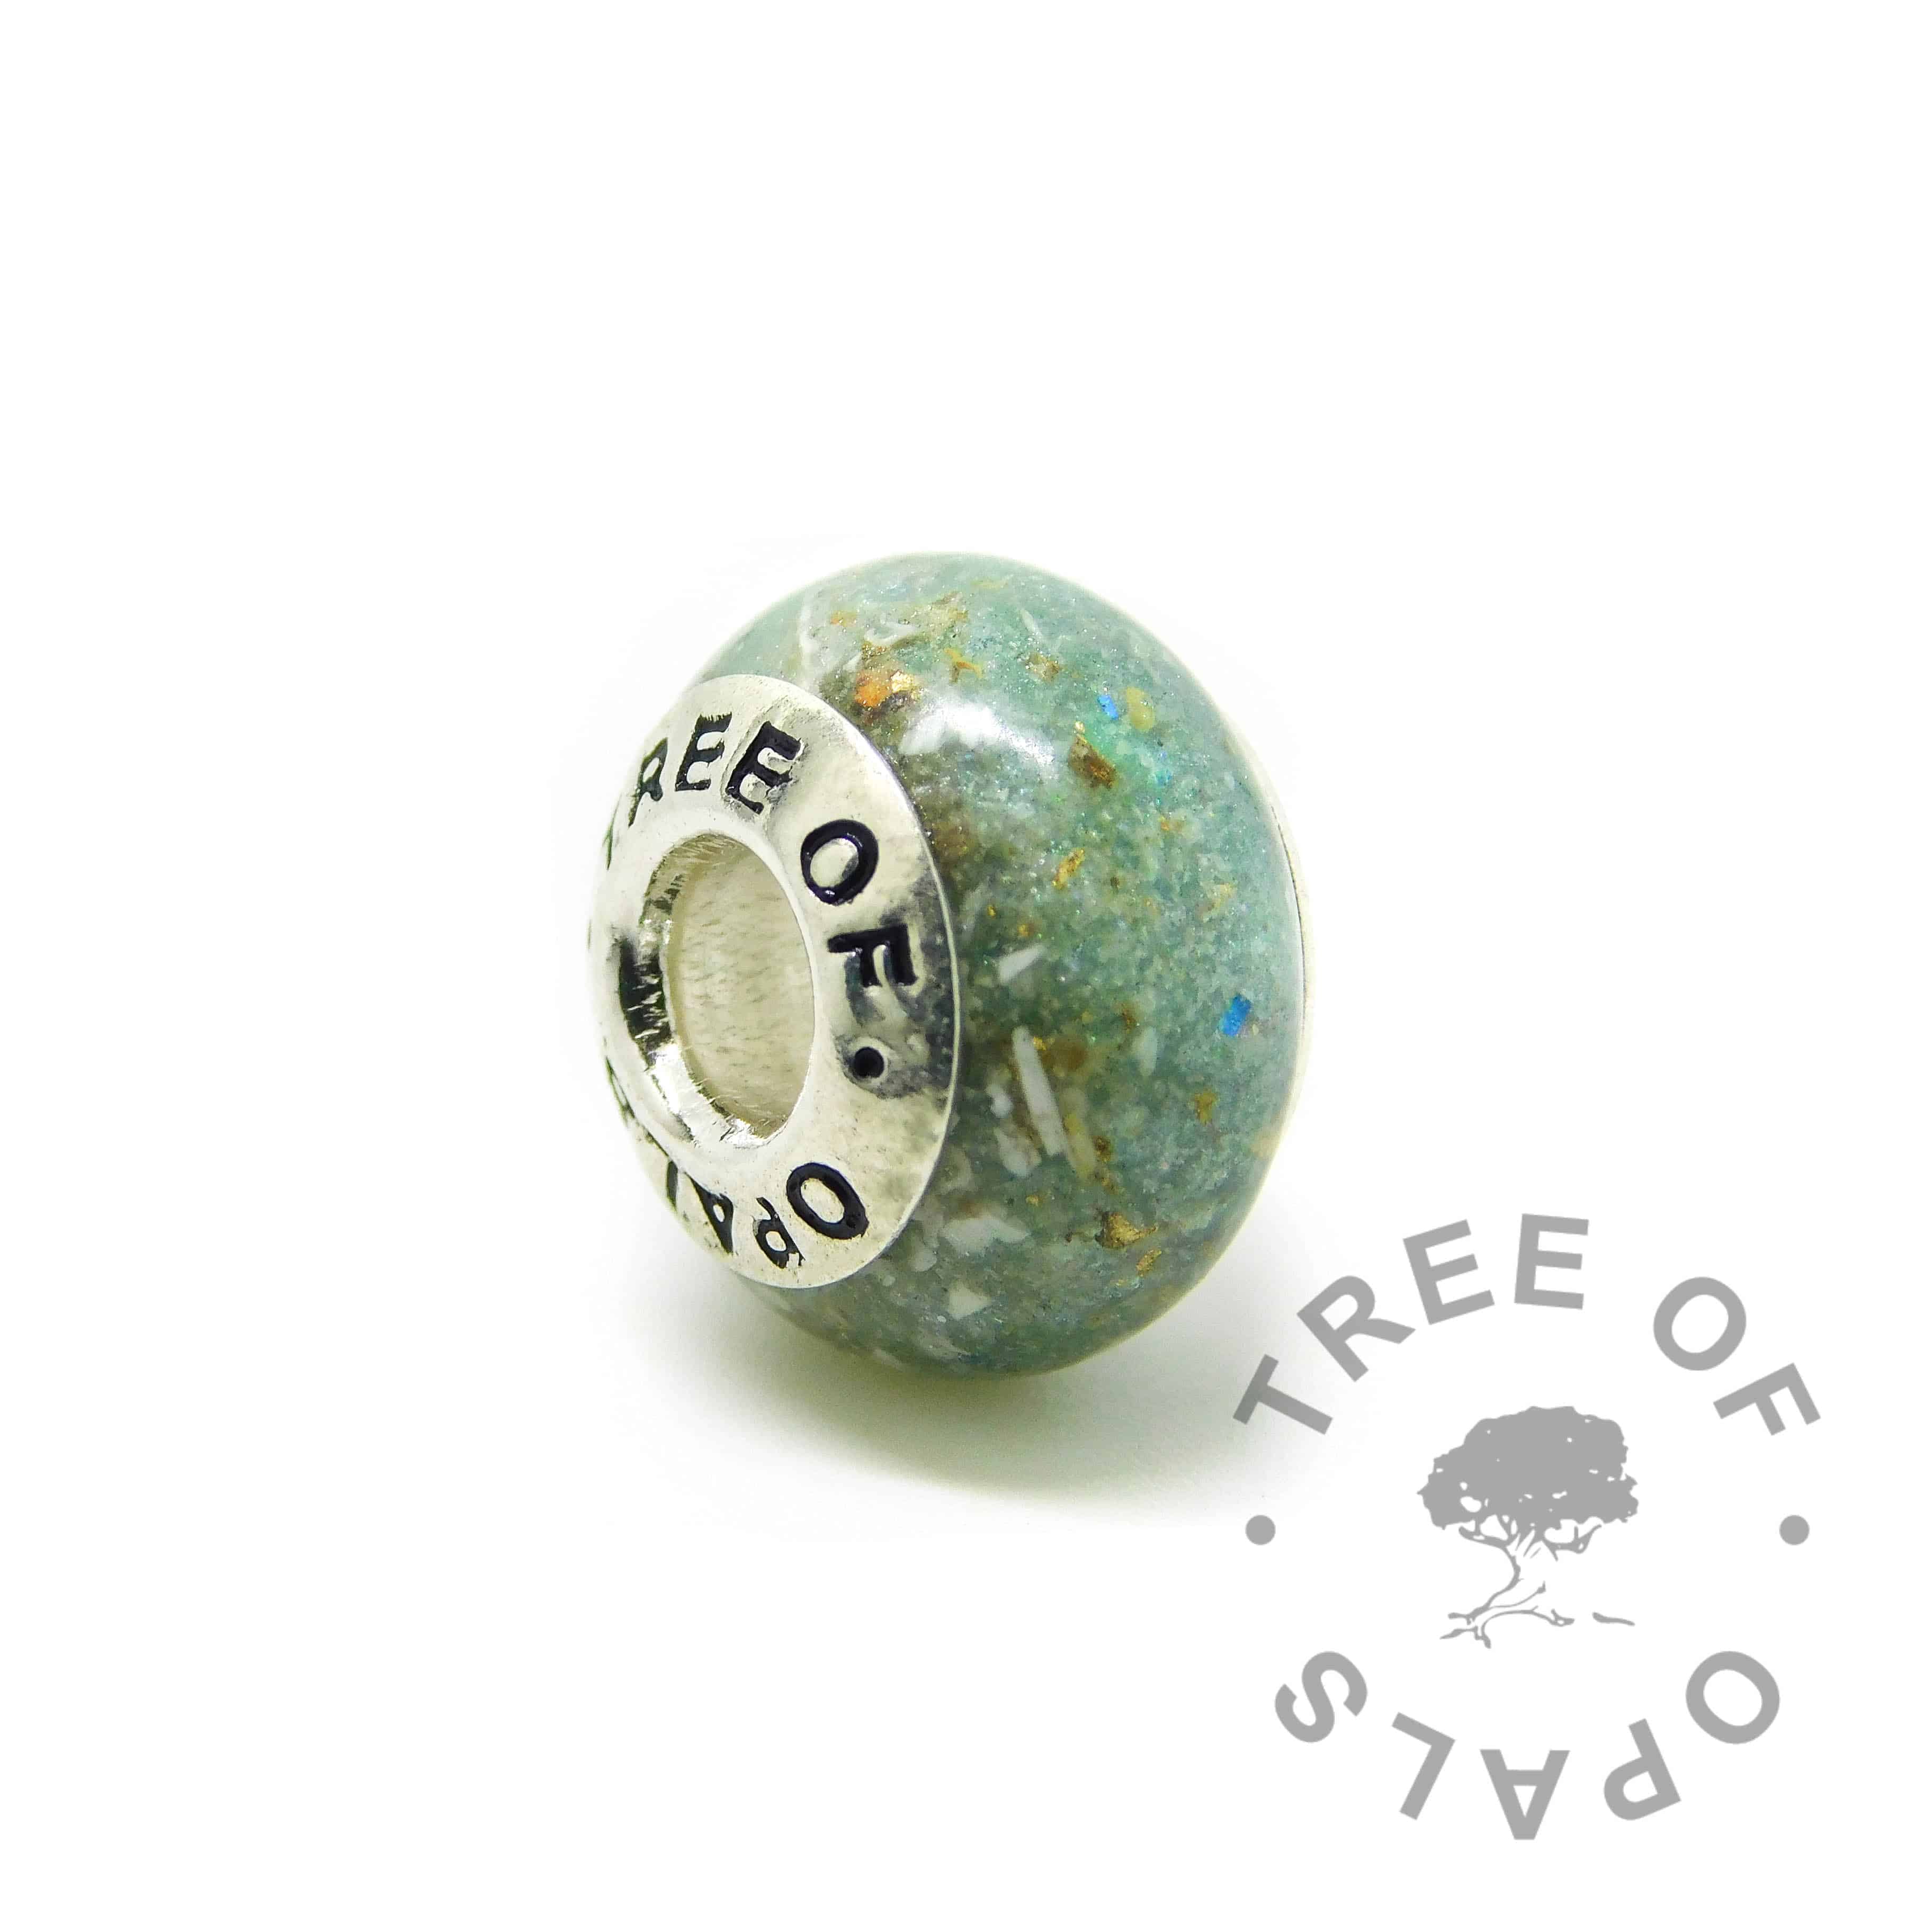 Cremation ash charm with basilisk green resin sparkle mix, no birthstone, gold leaf. Solid sterling silver Tree of Opals signature core (925 stamped on the back). Watermarked copyright Tree of Opals memorial jewellery image